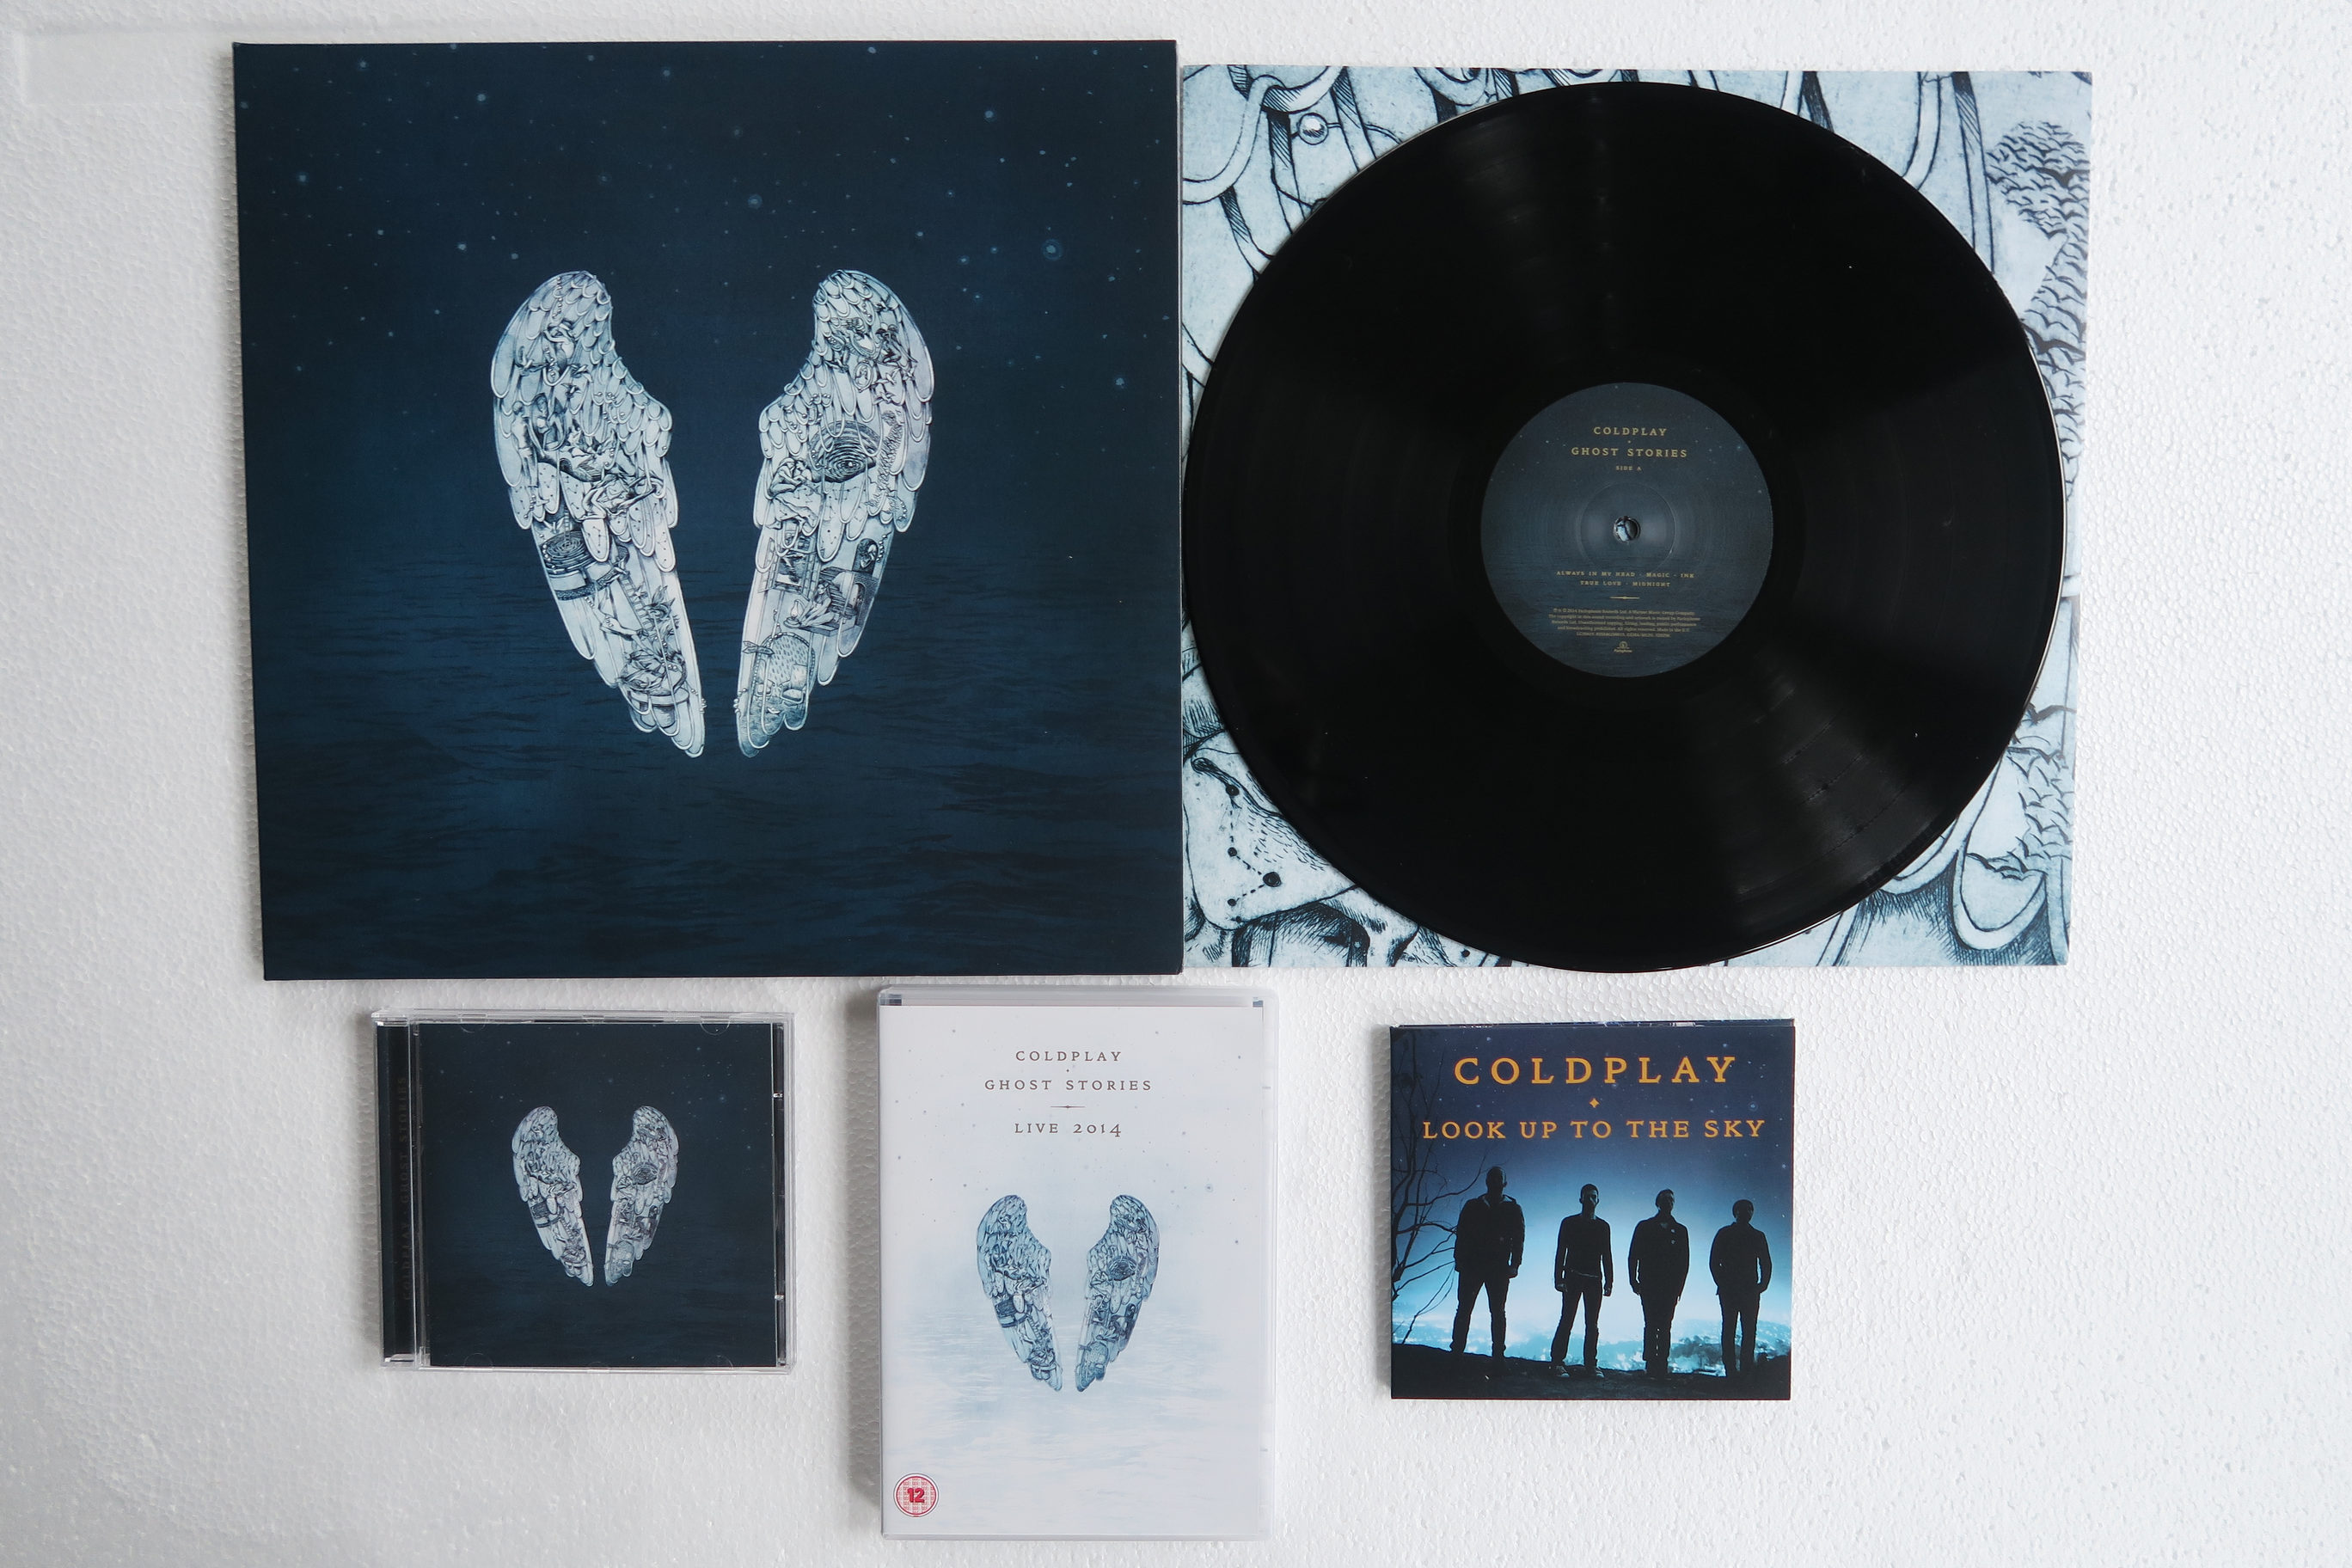 Coldplay "Ghost Stories" Era CDs, Vinyl Records, and Memorabilia Thread - Past Coldplaying